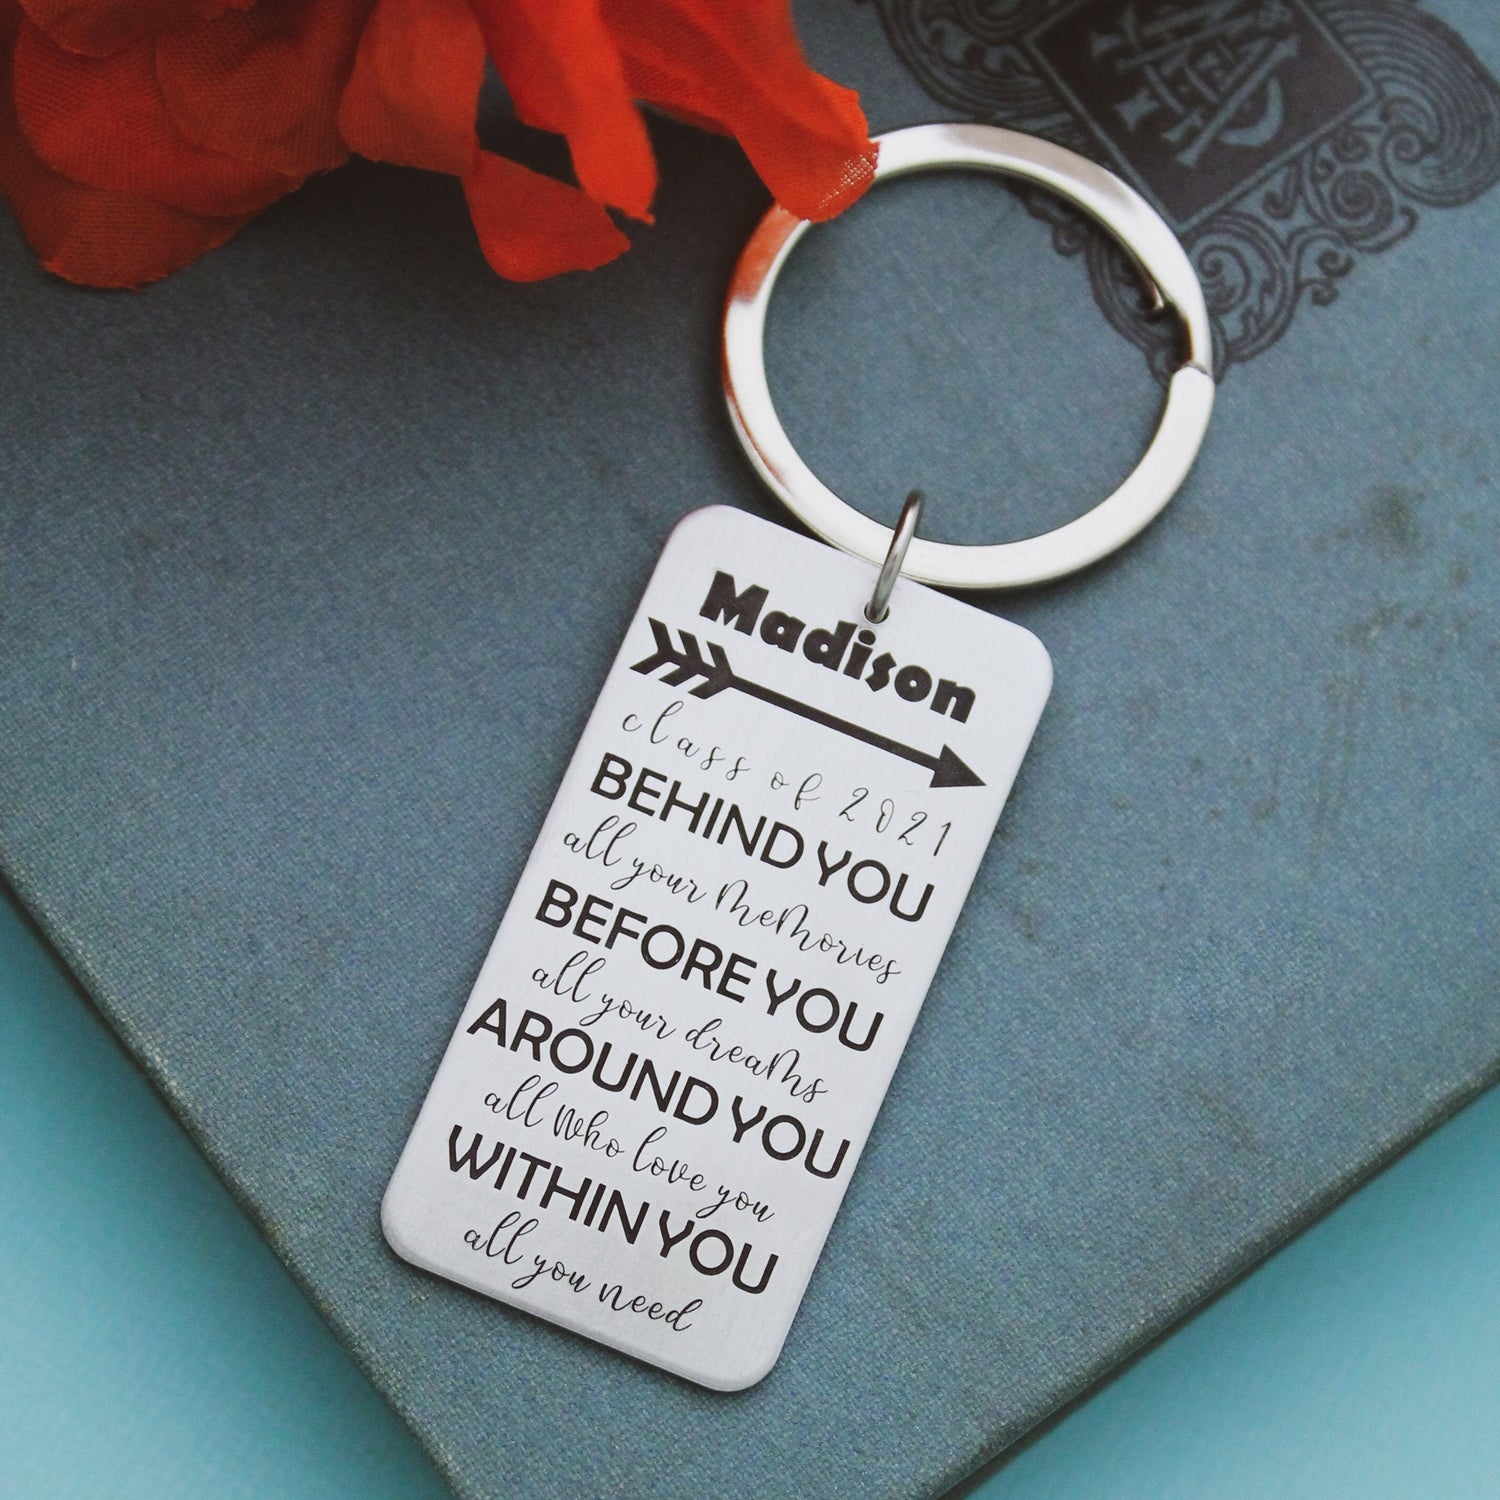 Graduation Keychain, Behind You all your memories, Before you all your dreams Keychain, Grad Keychain, Graduation Gifts, Grad Gift for Her